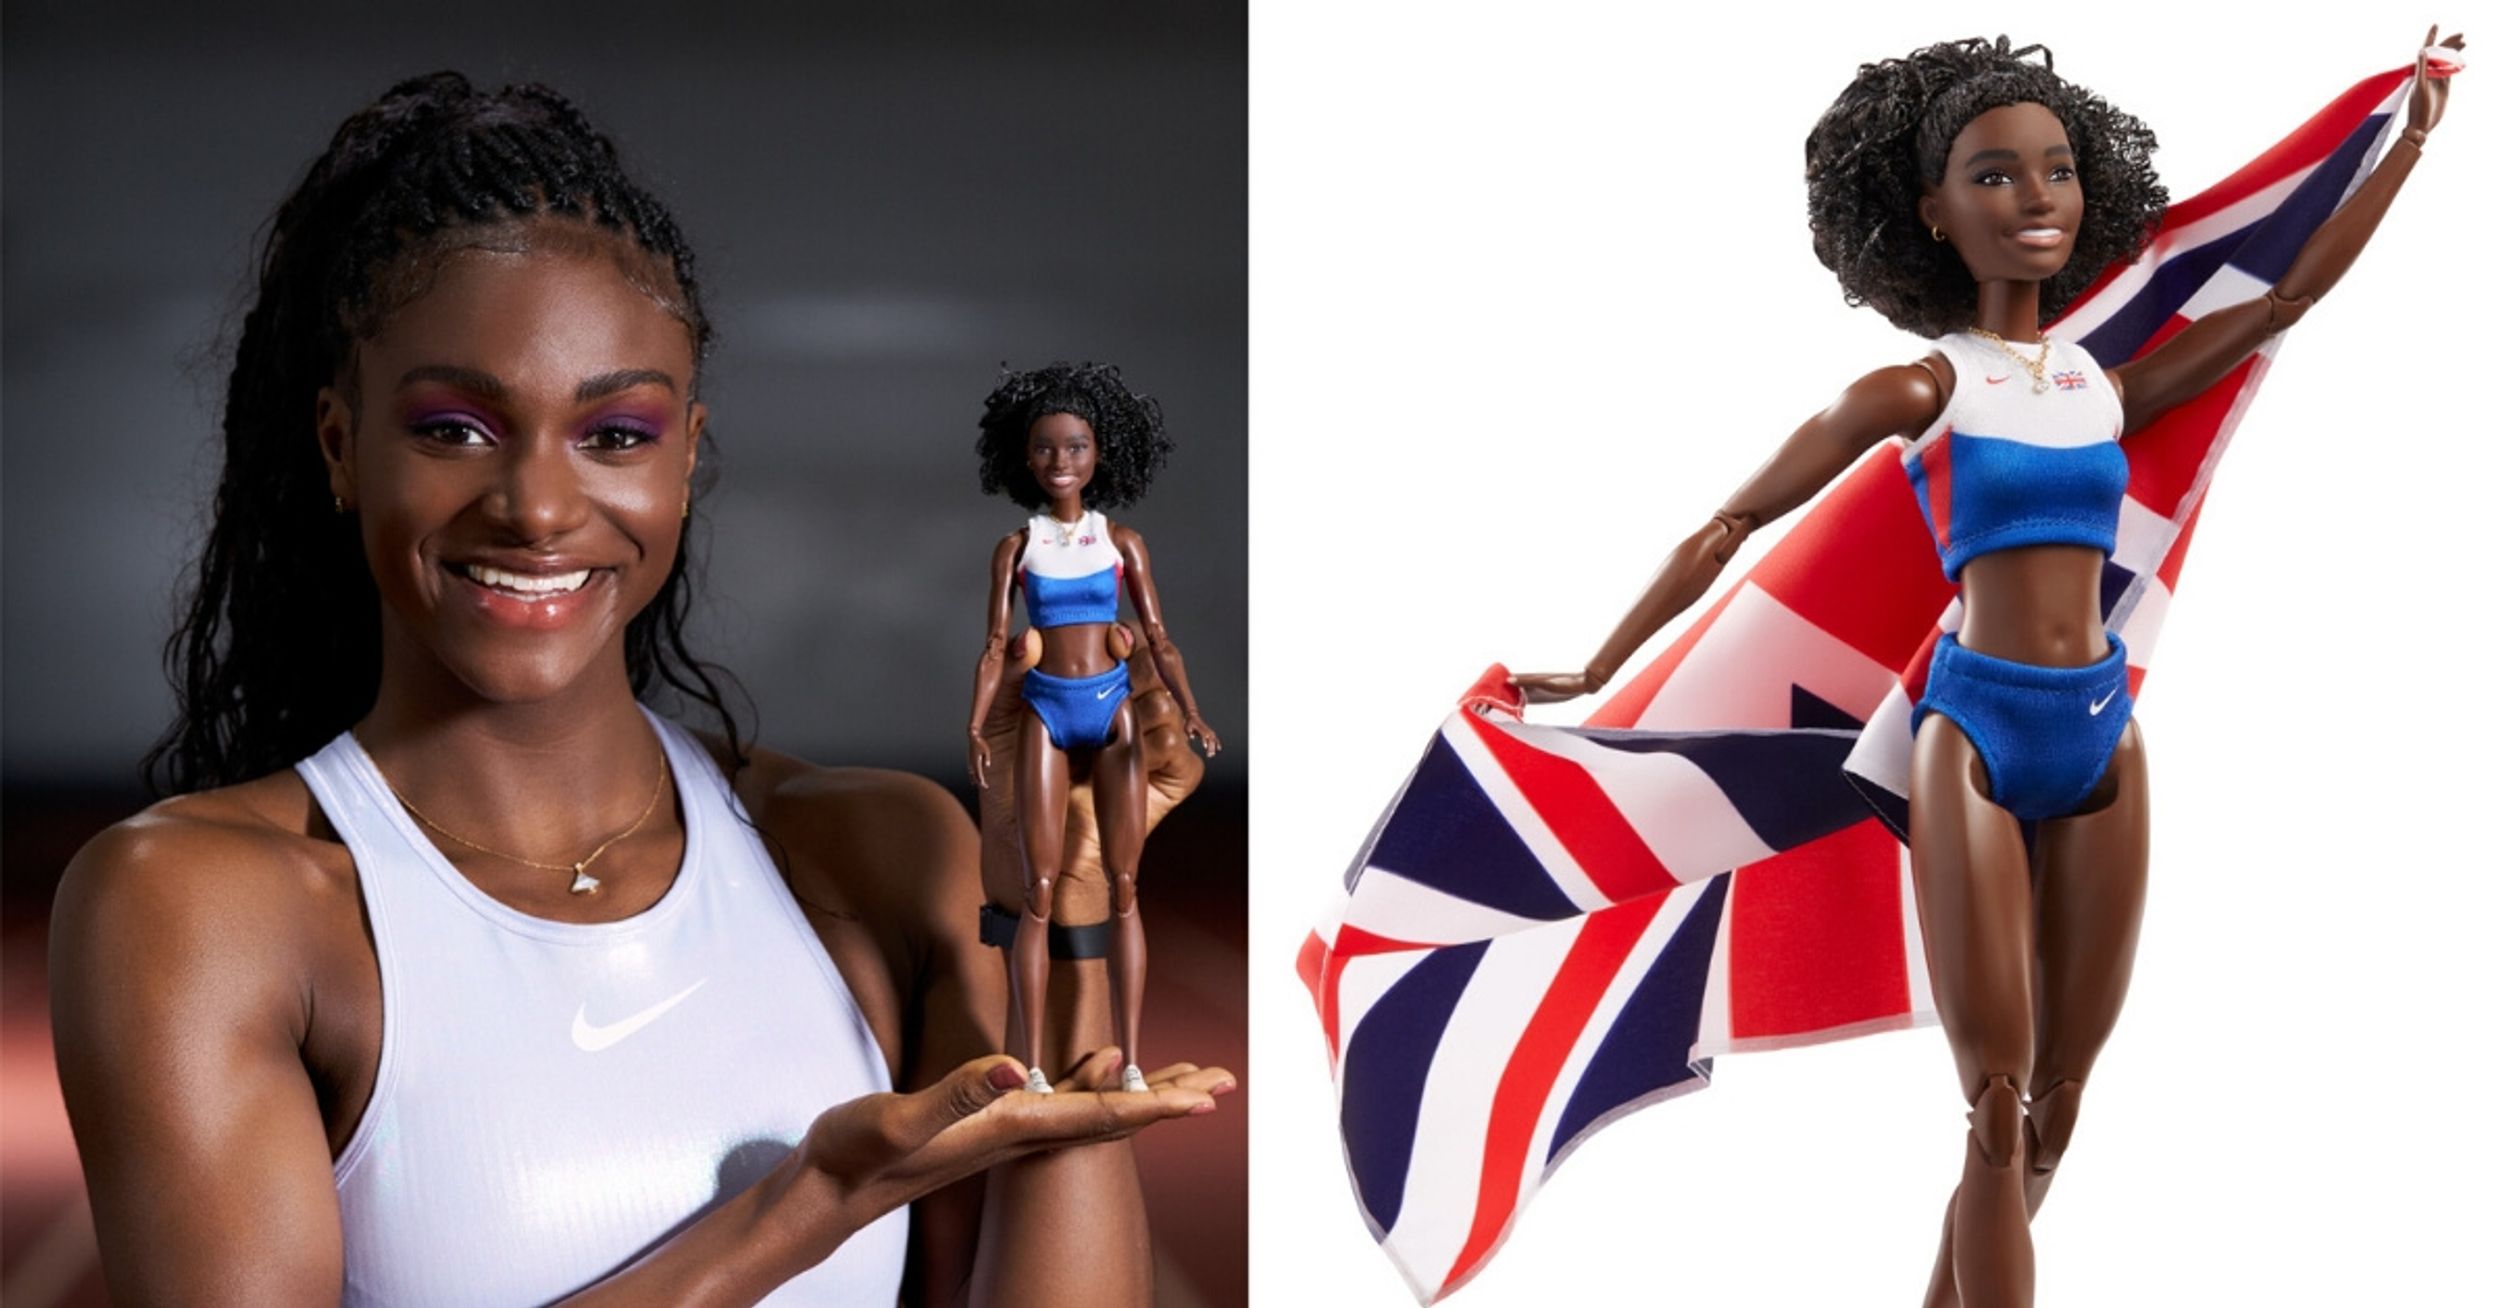 World Champion Sprinter Dina Asher-Smith, The Fastest Woman In British History, Has Been Honored With Her Own 'Shero' Barbie Doll